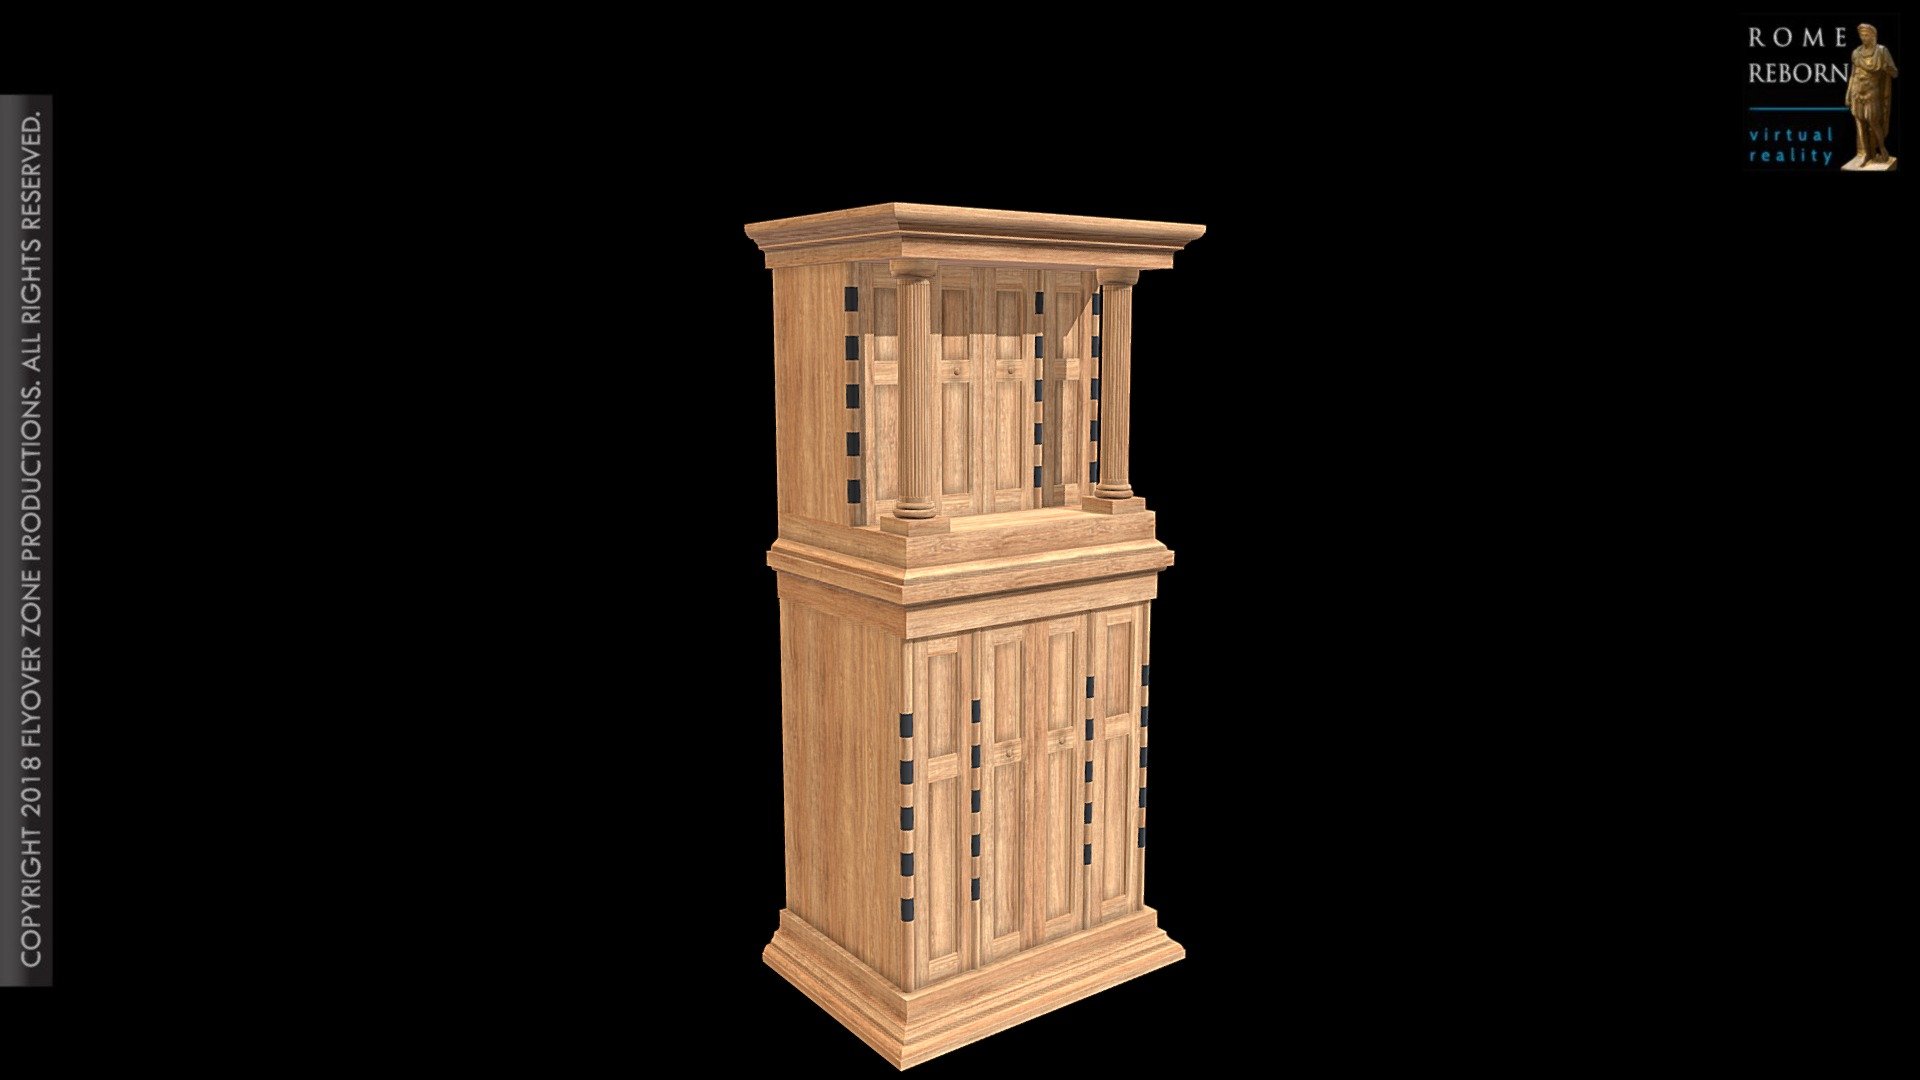 Name:  Shrine (reconstruction)
Material: Wood
Format: Furniture
Bibliography: A.T. Croom, Roman Furniture (The History Press, Stroud, Gloucestershire 2010) 134 (fig. 66)
Name of modeler: Davide Angheleddu
Copyright 2020 Flyover Zone, Inc. All rights reserved.
 - Shrine (reconstruction) - 3D model by Flyover Zone (@FlyoverZone) 3d model